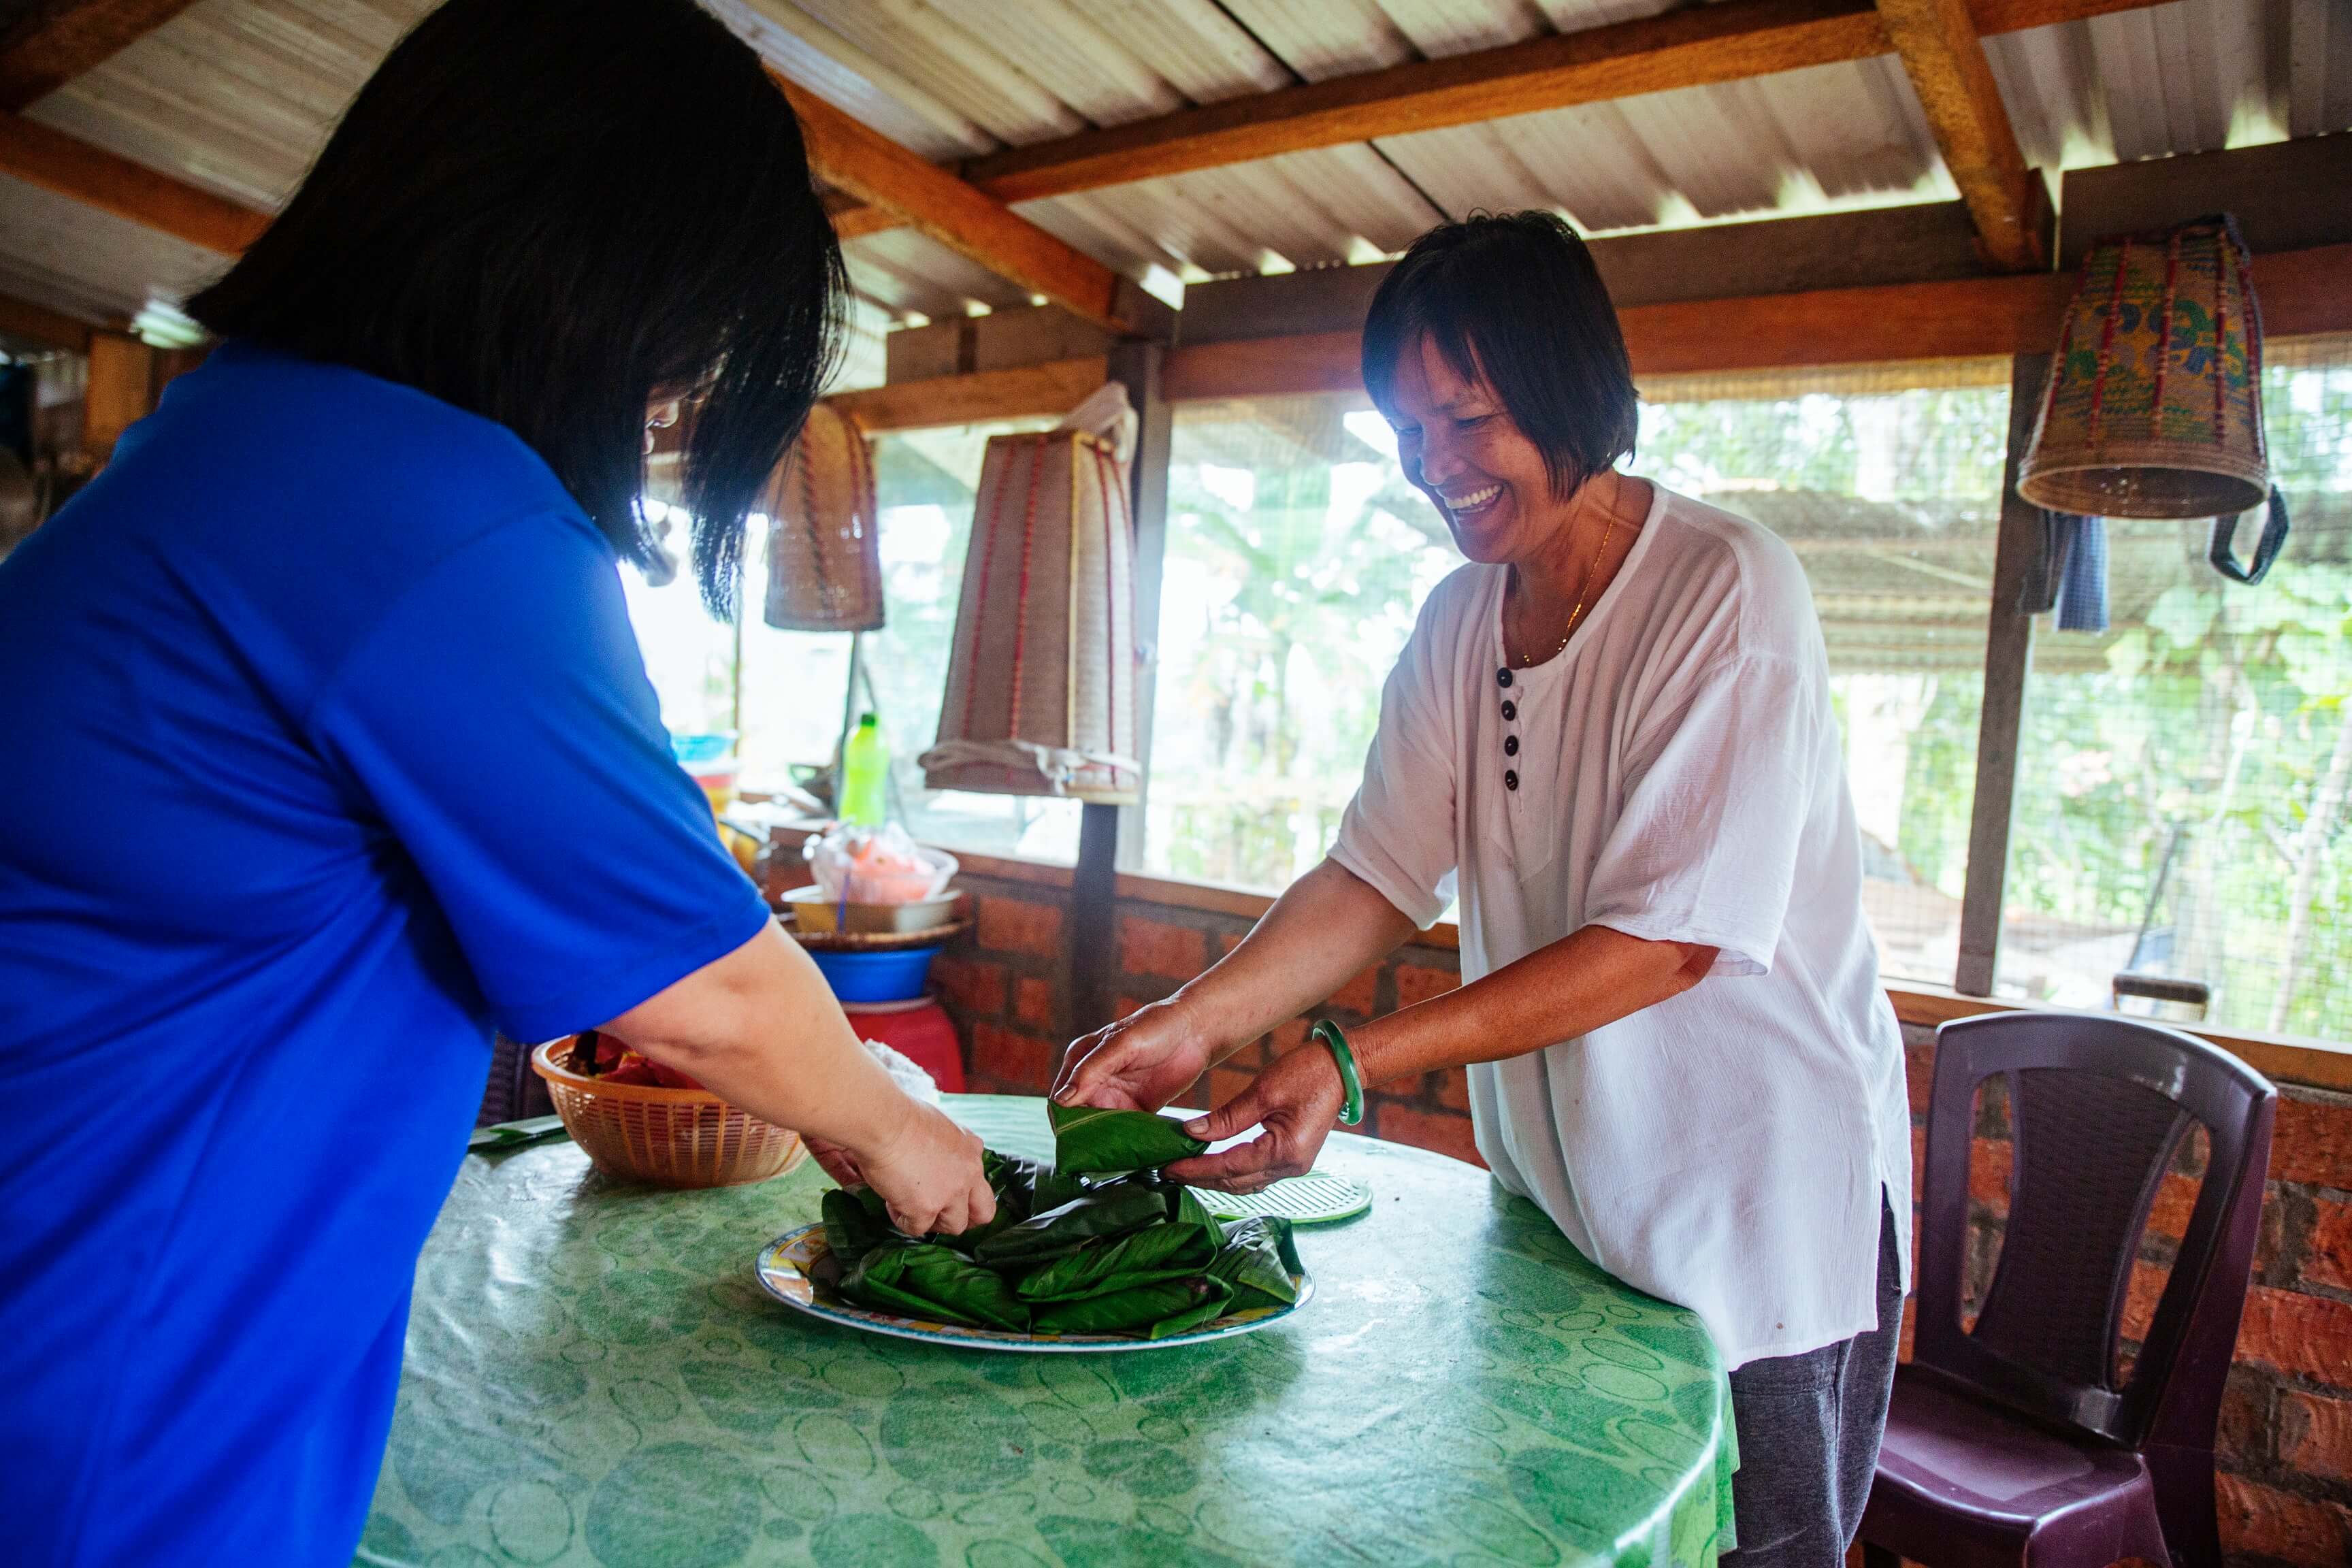 Aunty Ribed sets out a plate of food on a table. As Langit Collective's first homestay partner, and she will wow you with her deep knowledge about rice farming and agrarian life in general.